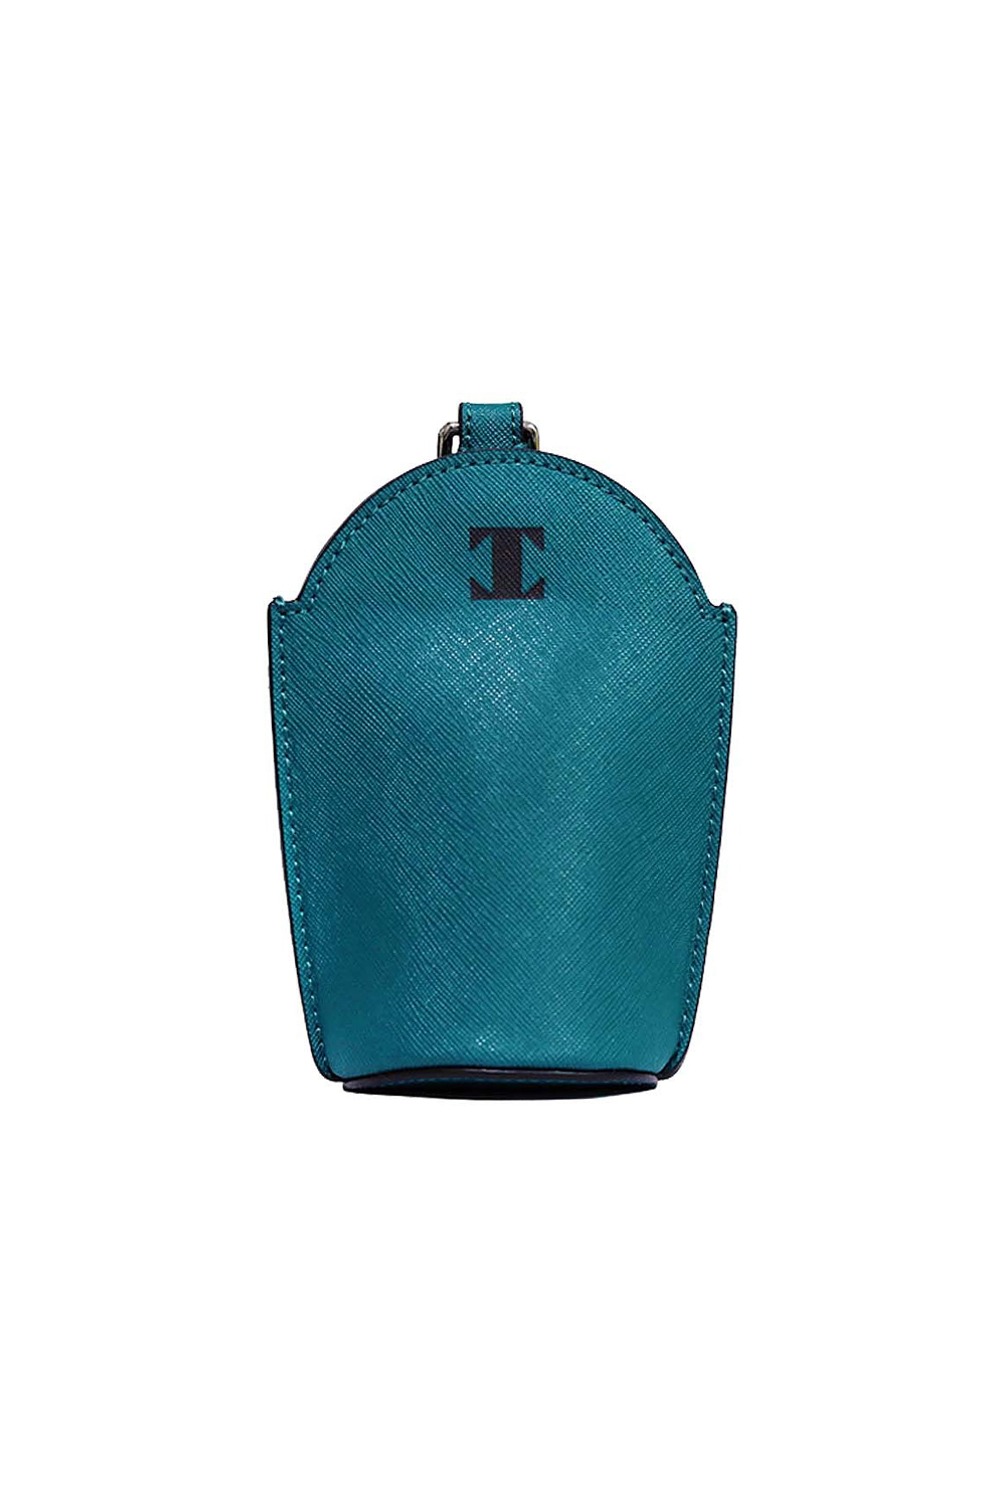 ALL ROUND POUCH (PEACOCK GREEN) RICHEZ